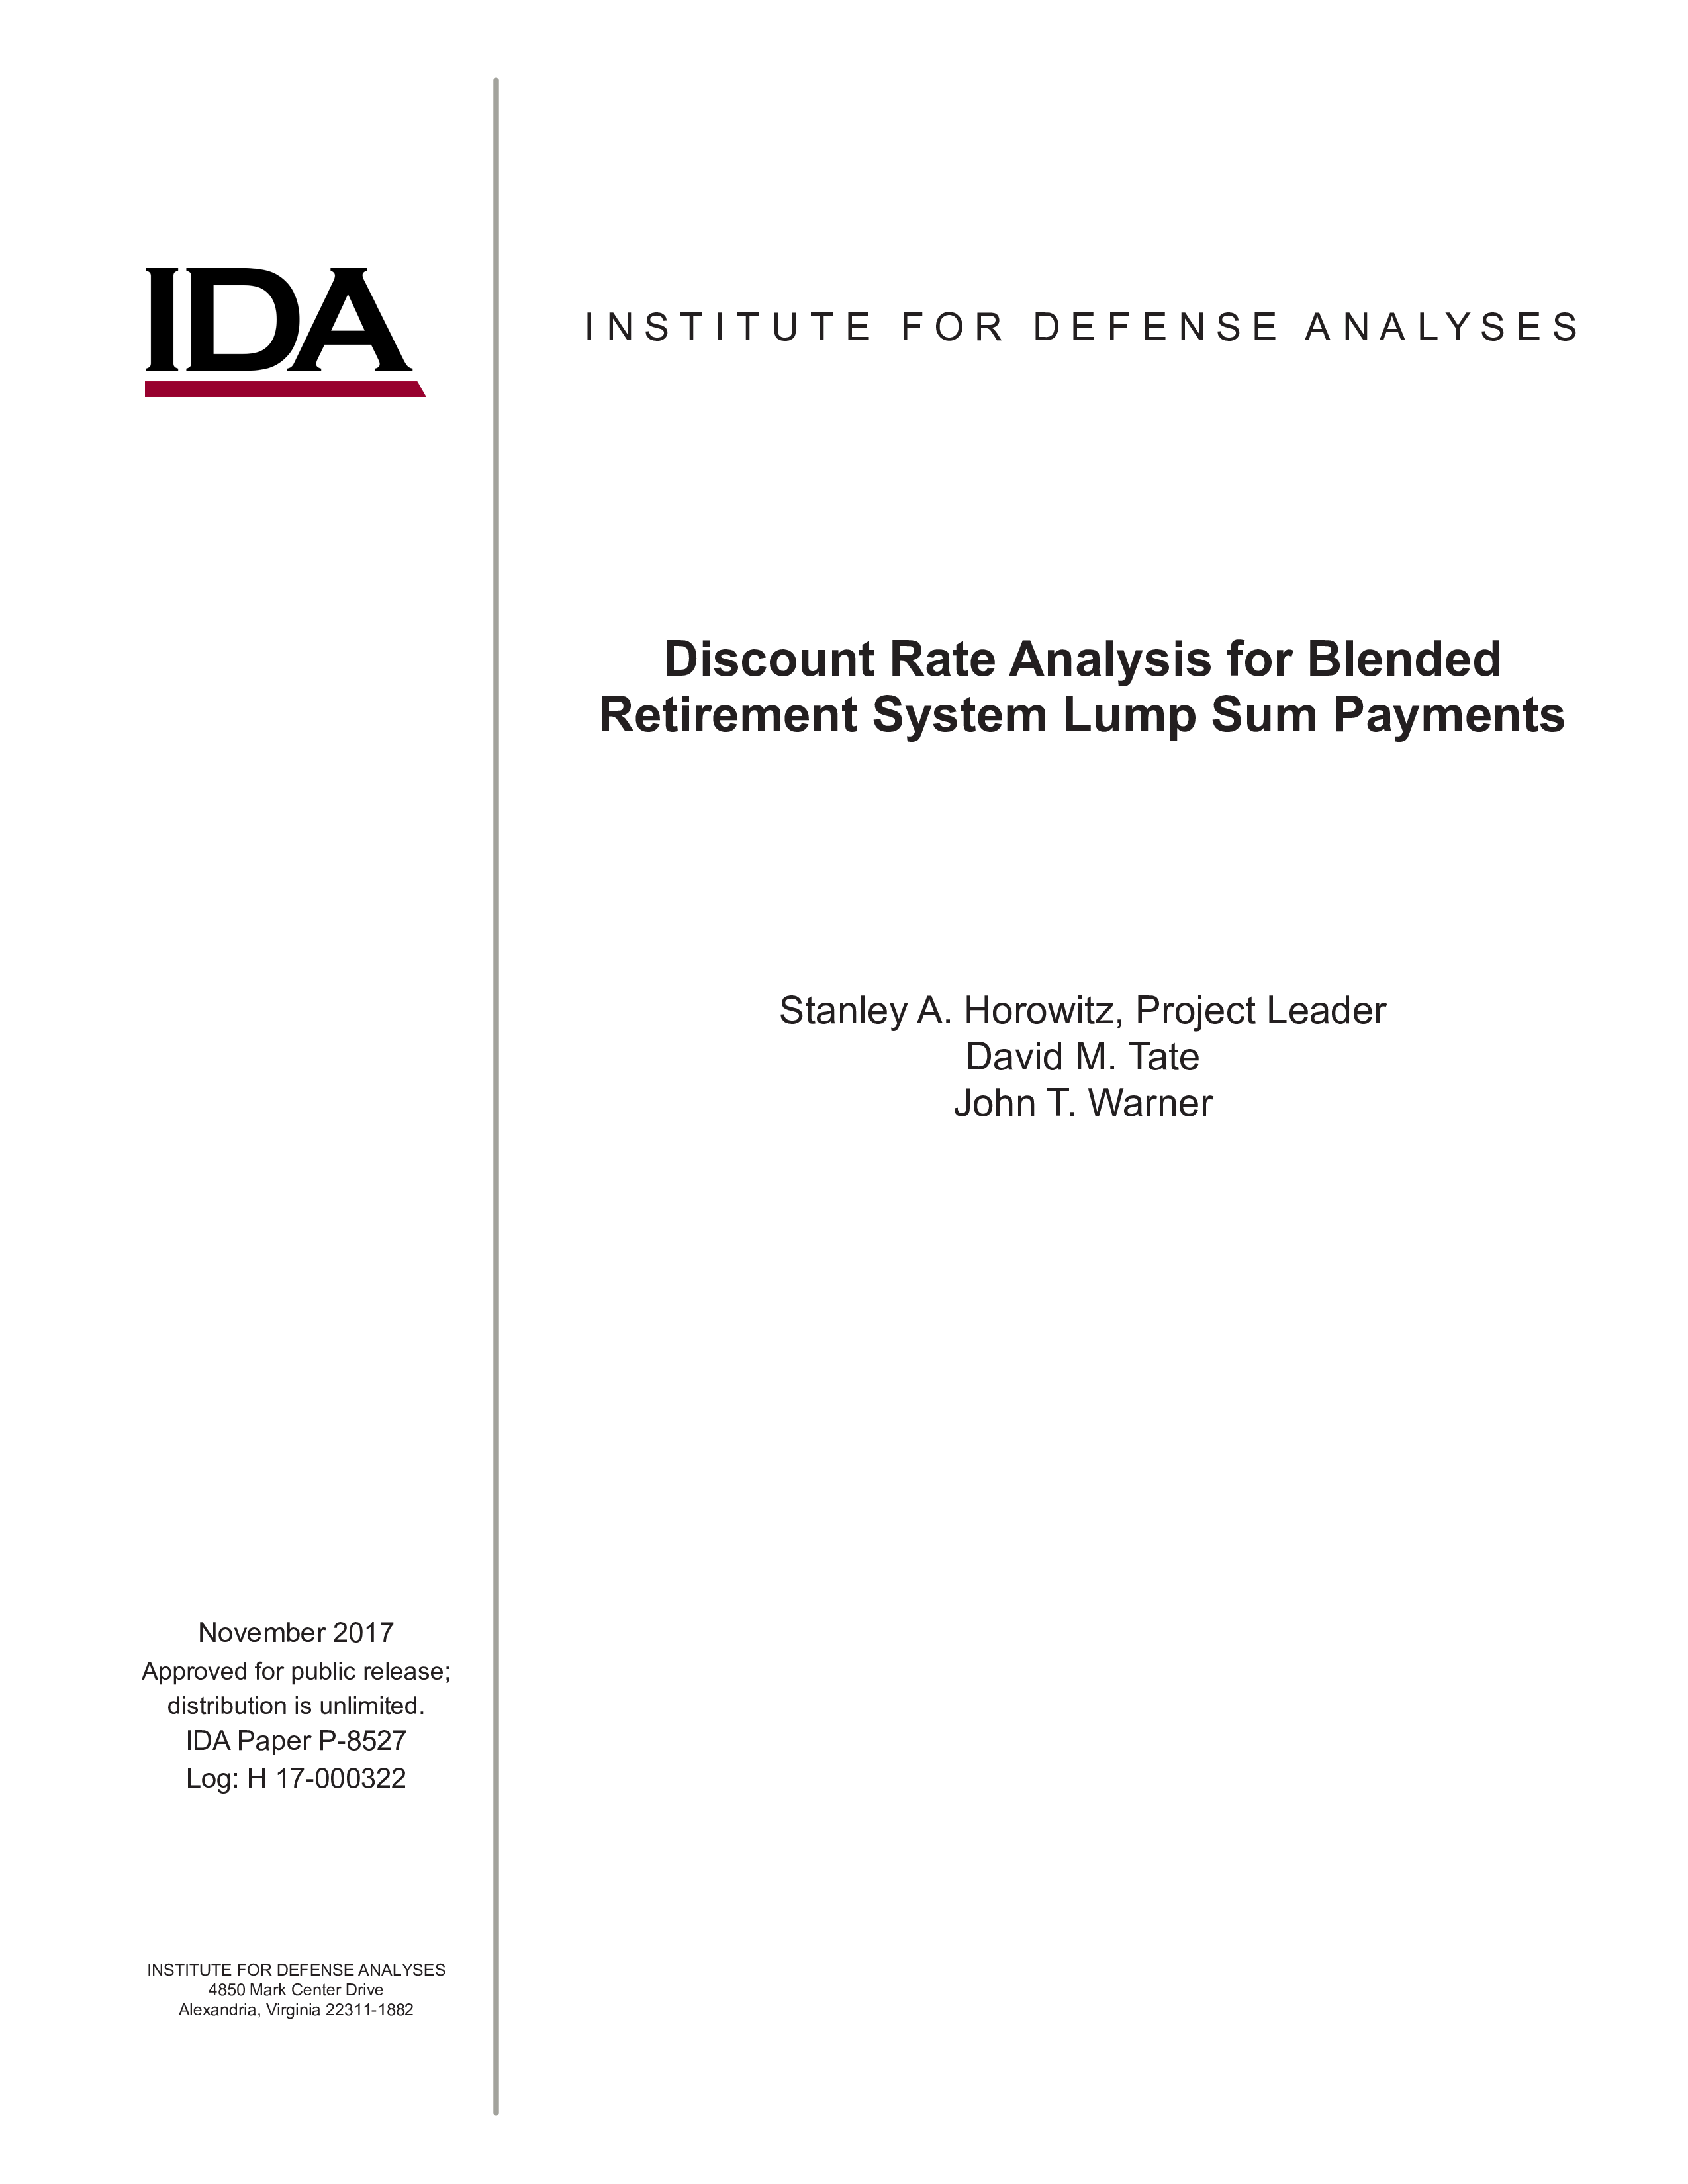 Discount Rate Analysis for Blended Retirement System Lump Sum Payments